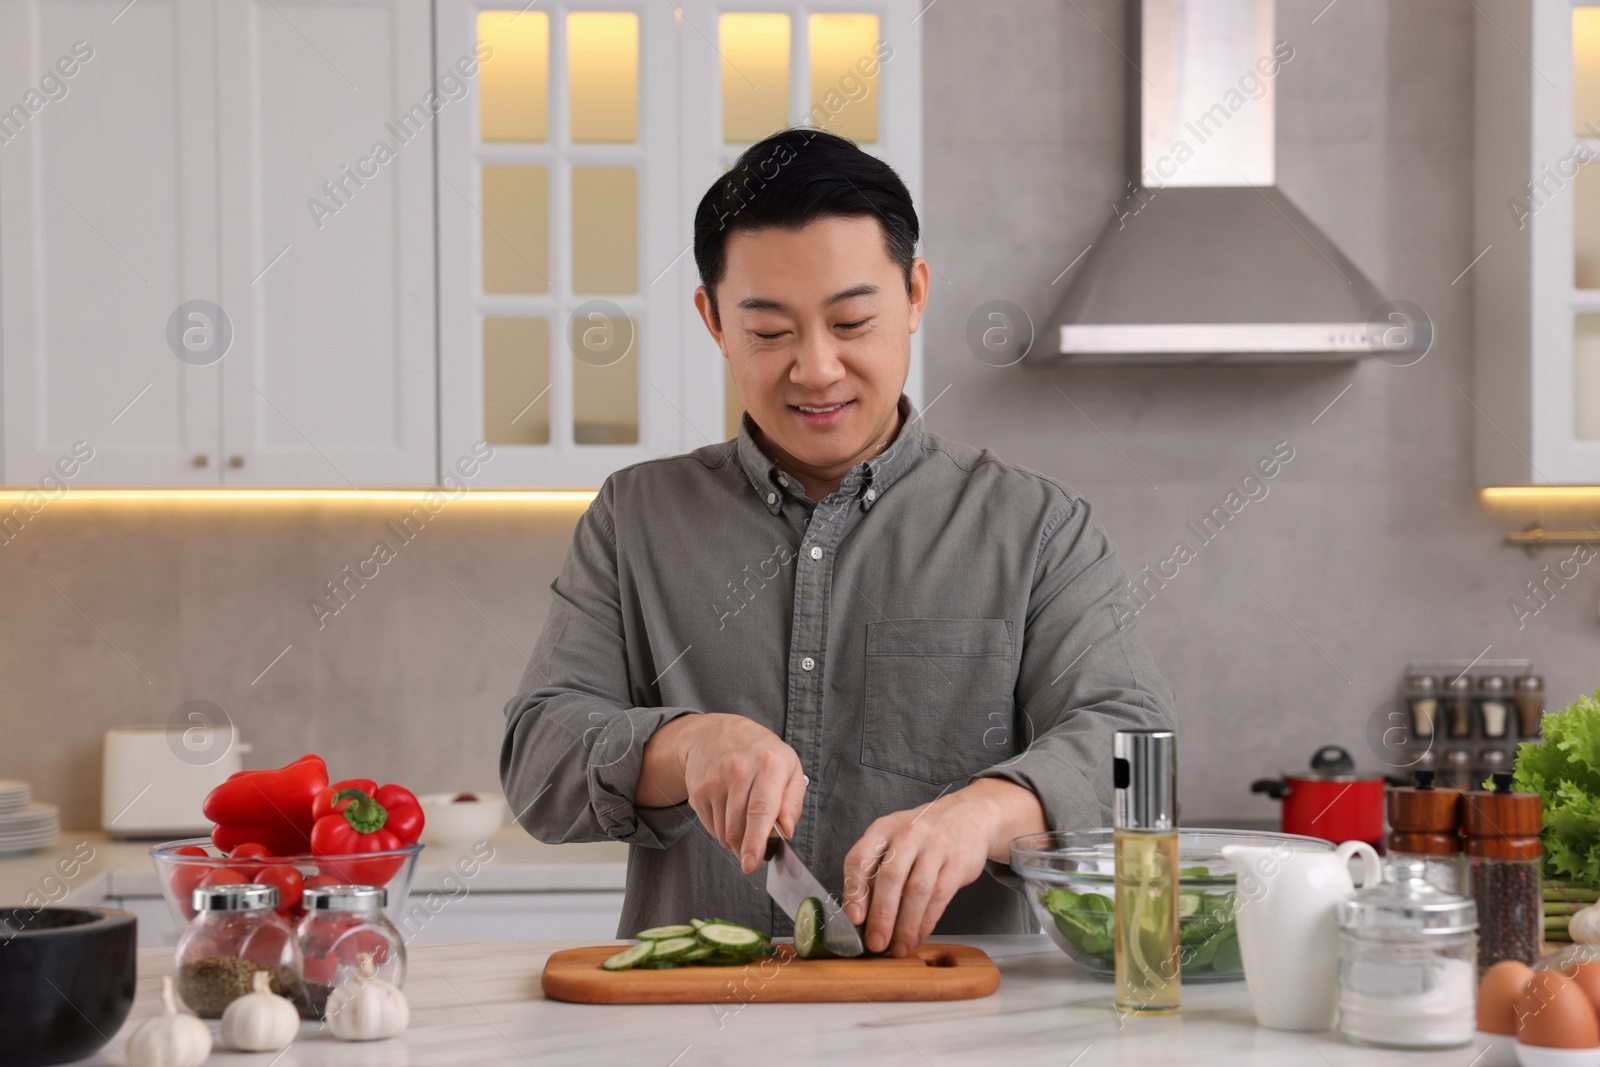 Photo of Cooking process. Man cutting fresh cucumber at countertop in kitchen